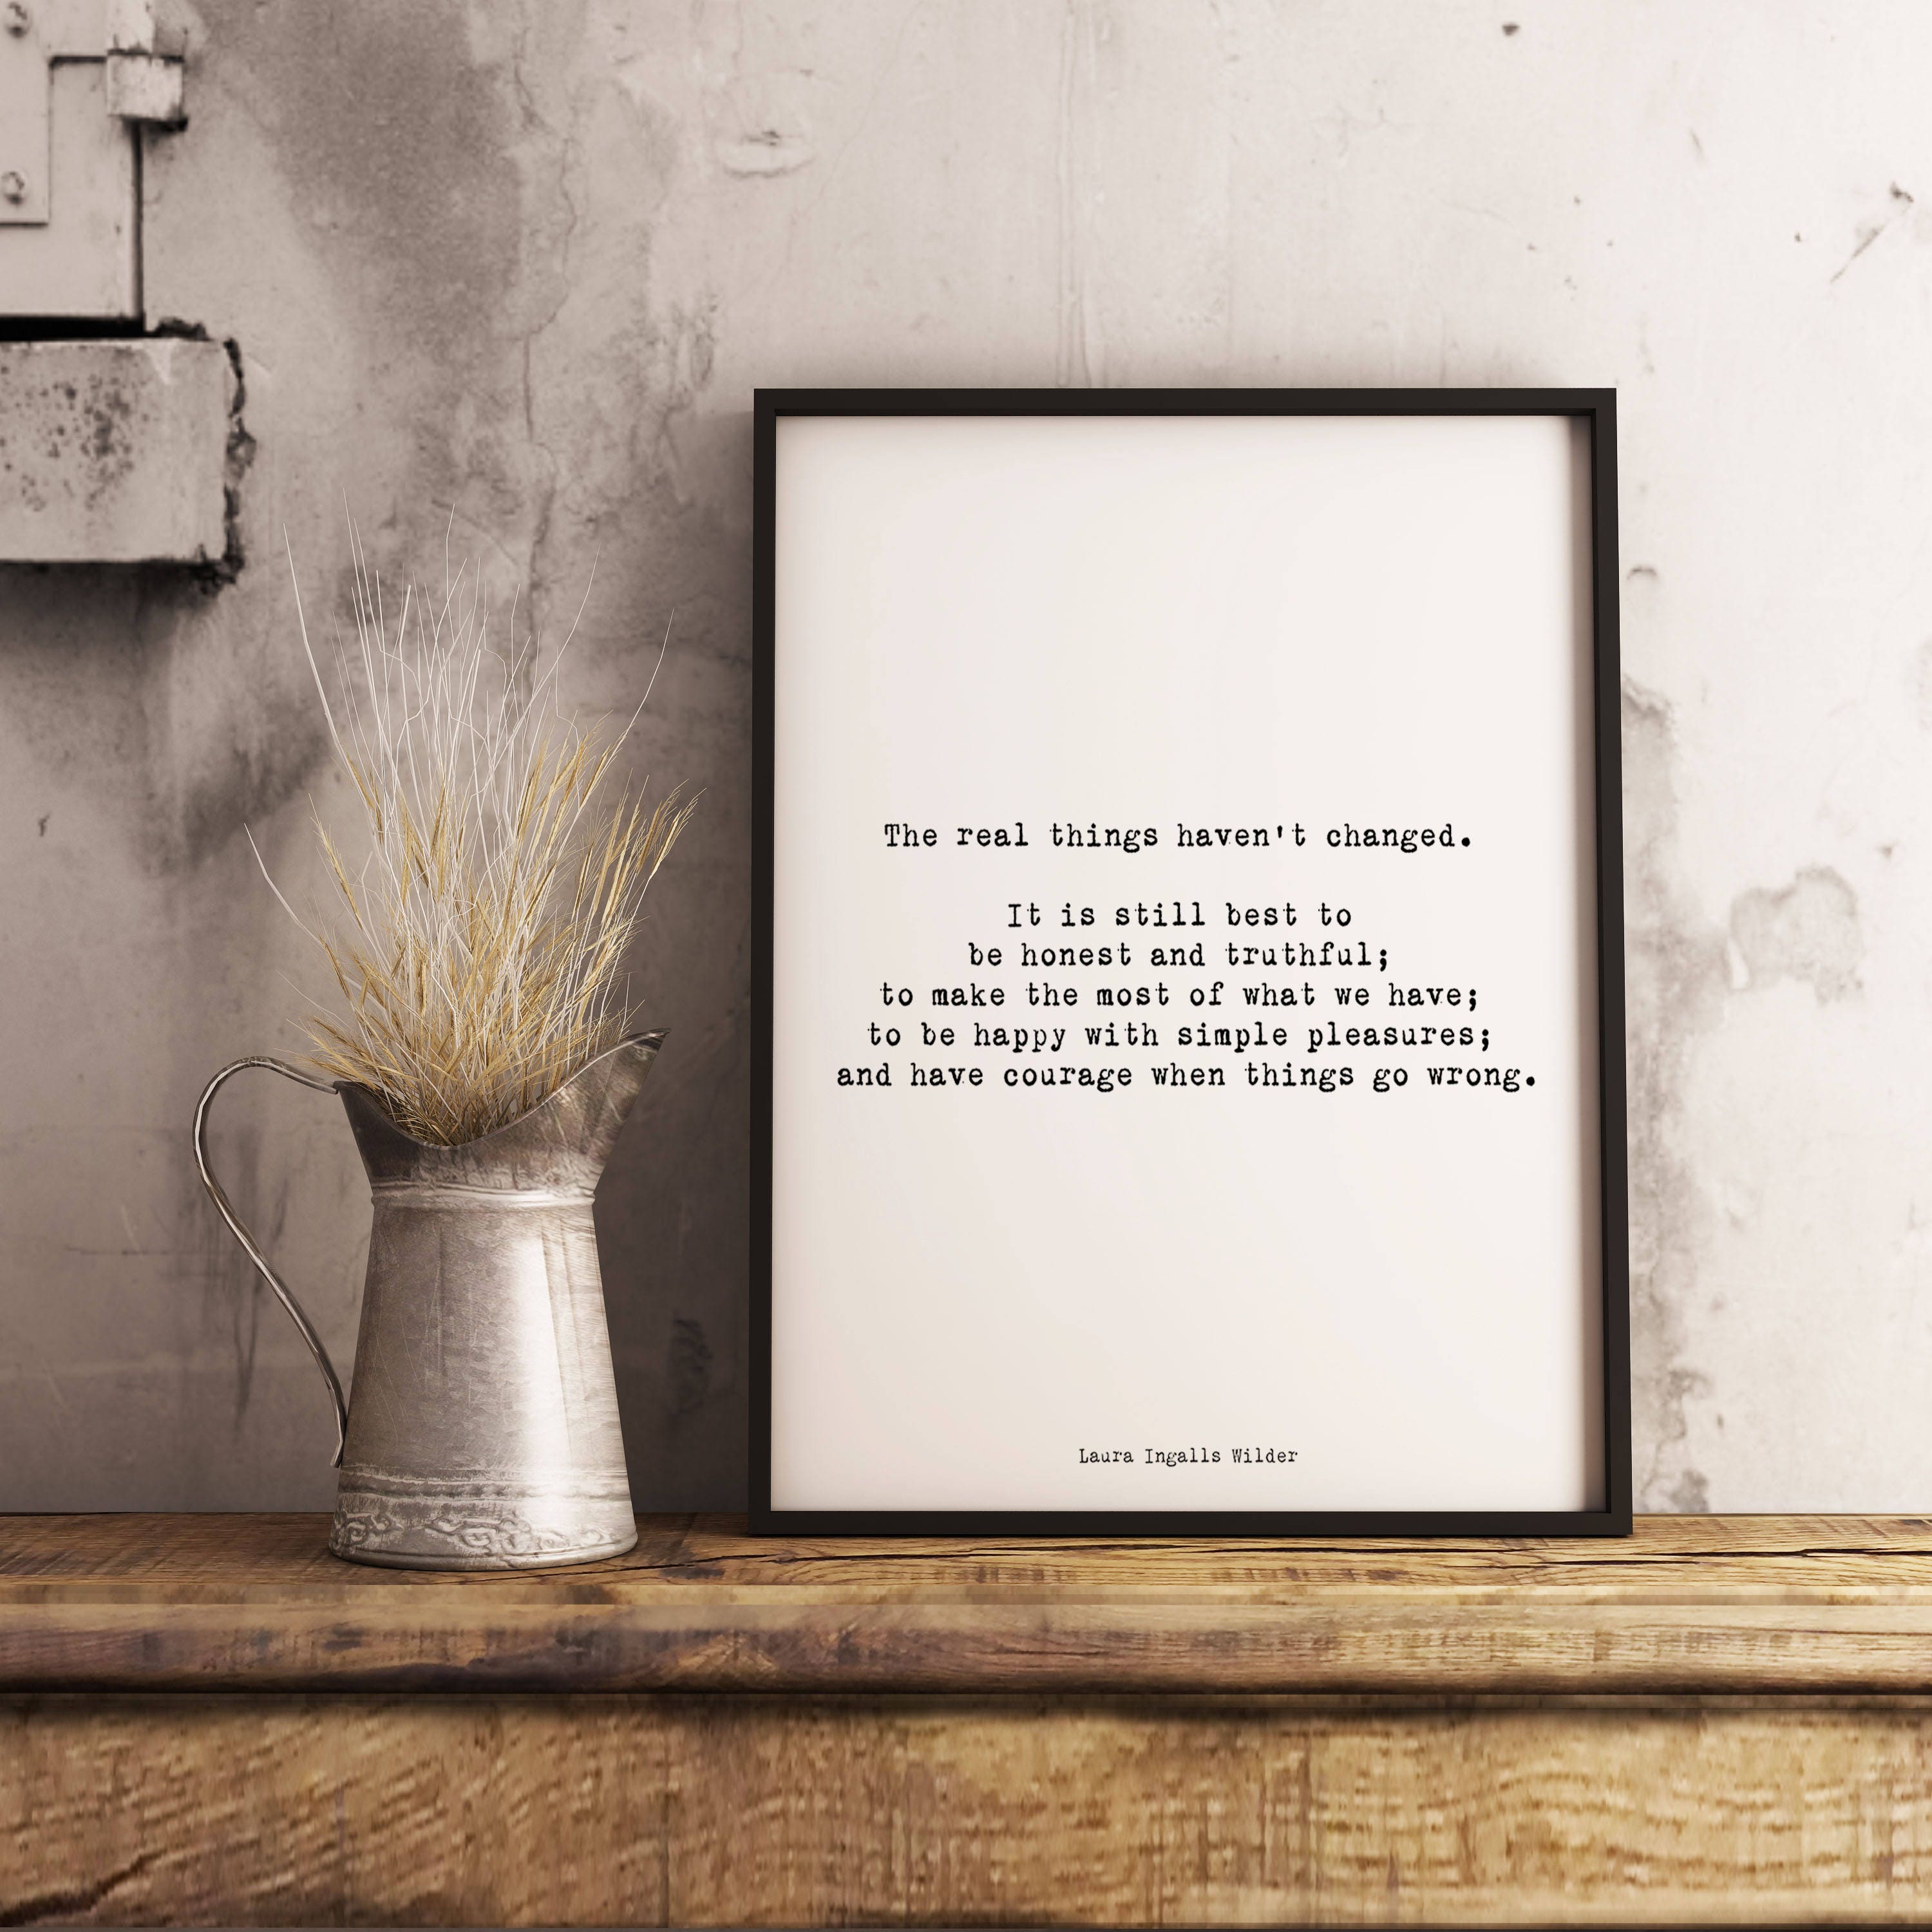 Laura Ingalls Wilder The Real Things Haven't Changed Unframed Inspirational Wall Art Quote Print, Typography Wall Decor in Black & White